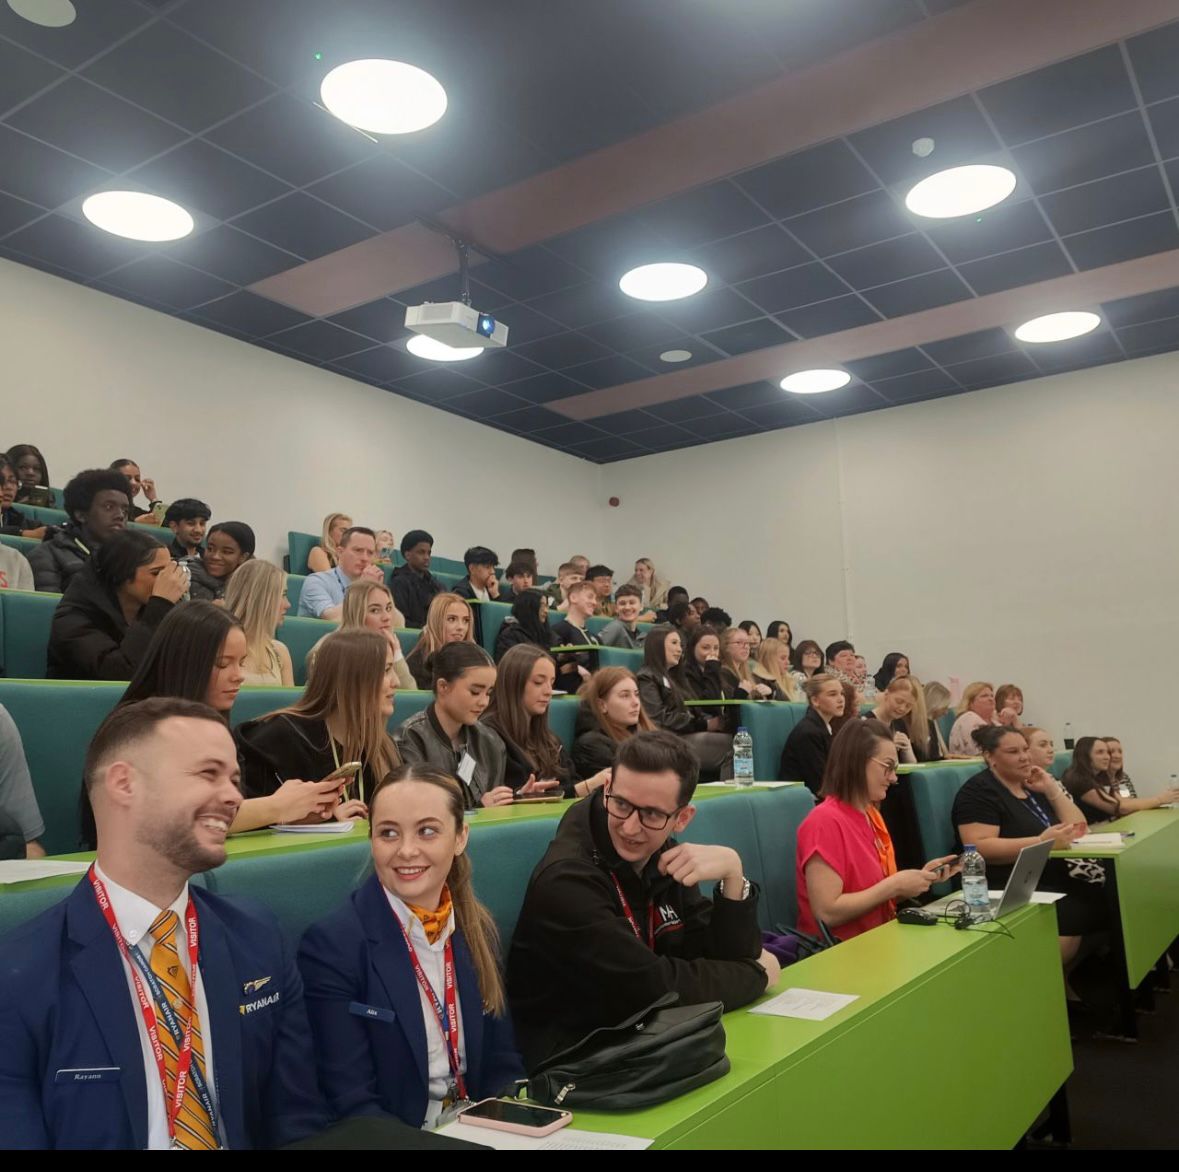 Our Commercial Director Andrew Clarke soared into Eccles Sixth Form College for a 'Your Flight to Success' event! Students got an insightful look at careers in business travel & tourism ✈️ #FutureReady #BusinessTravel